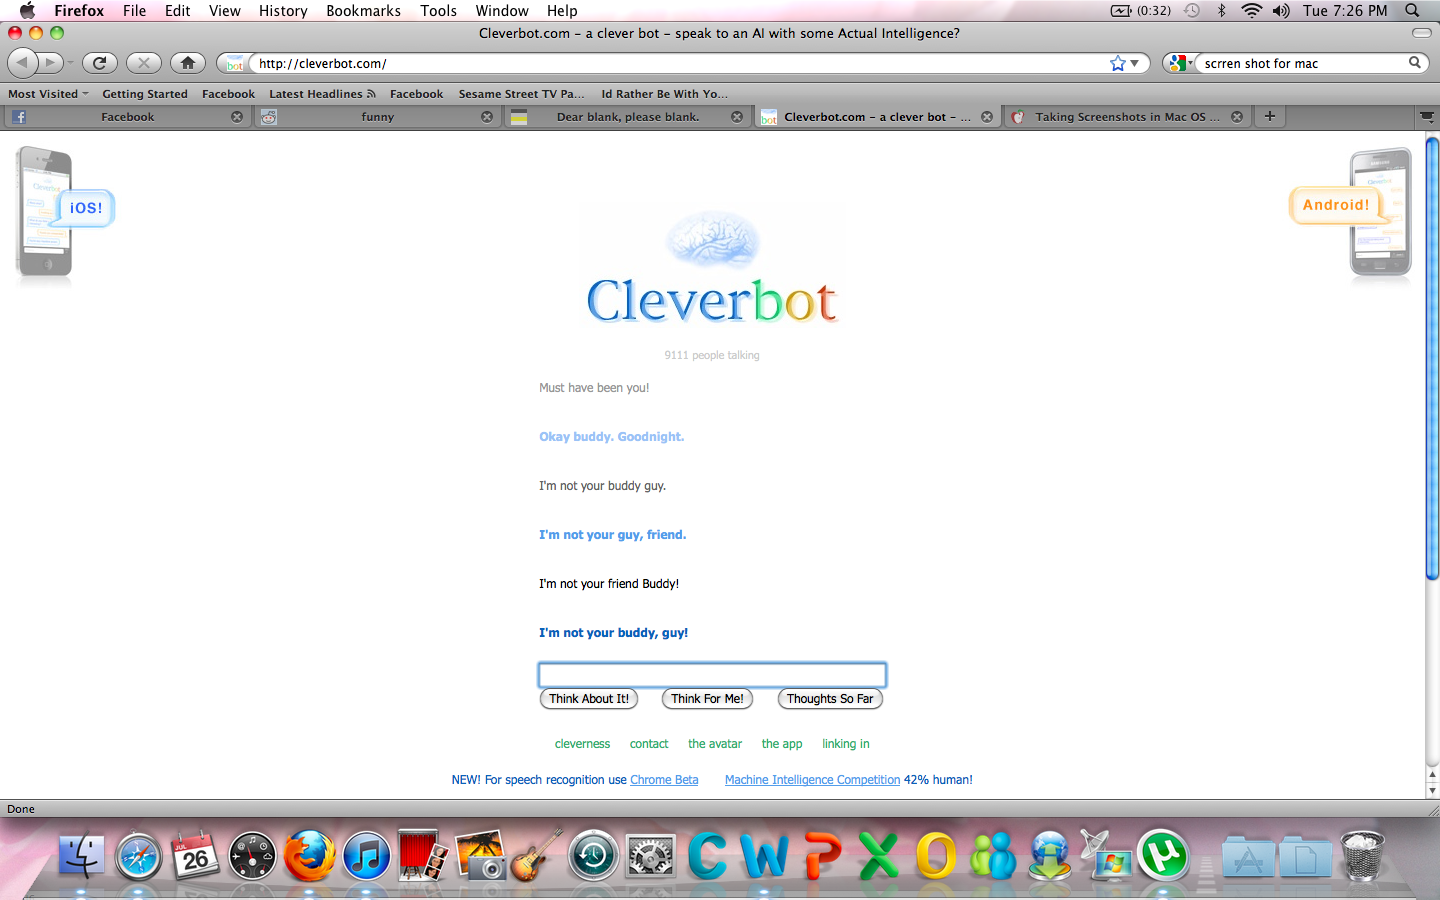 cleverbot - Firefox File Edit View History Bookmarks Tue Tools Window Help Cleverbot.com a clever bot speak to an Al with some Actual Intelligence? bot 8 scrren shot for mac Most Visited Getting Started Facebook Latest Headlines a Facebook Facebook funny 